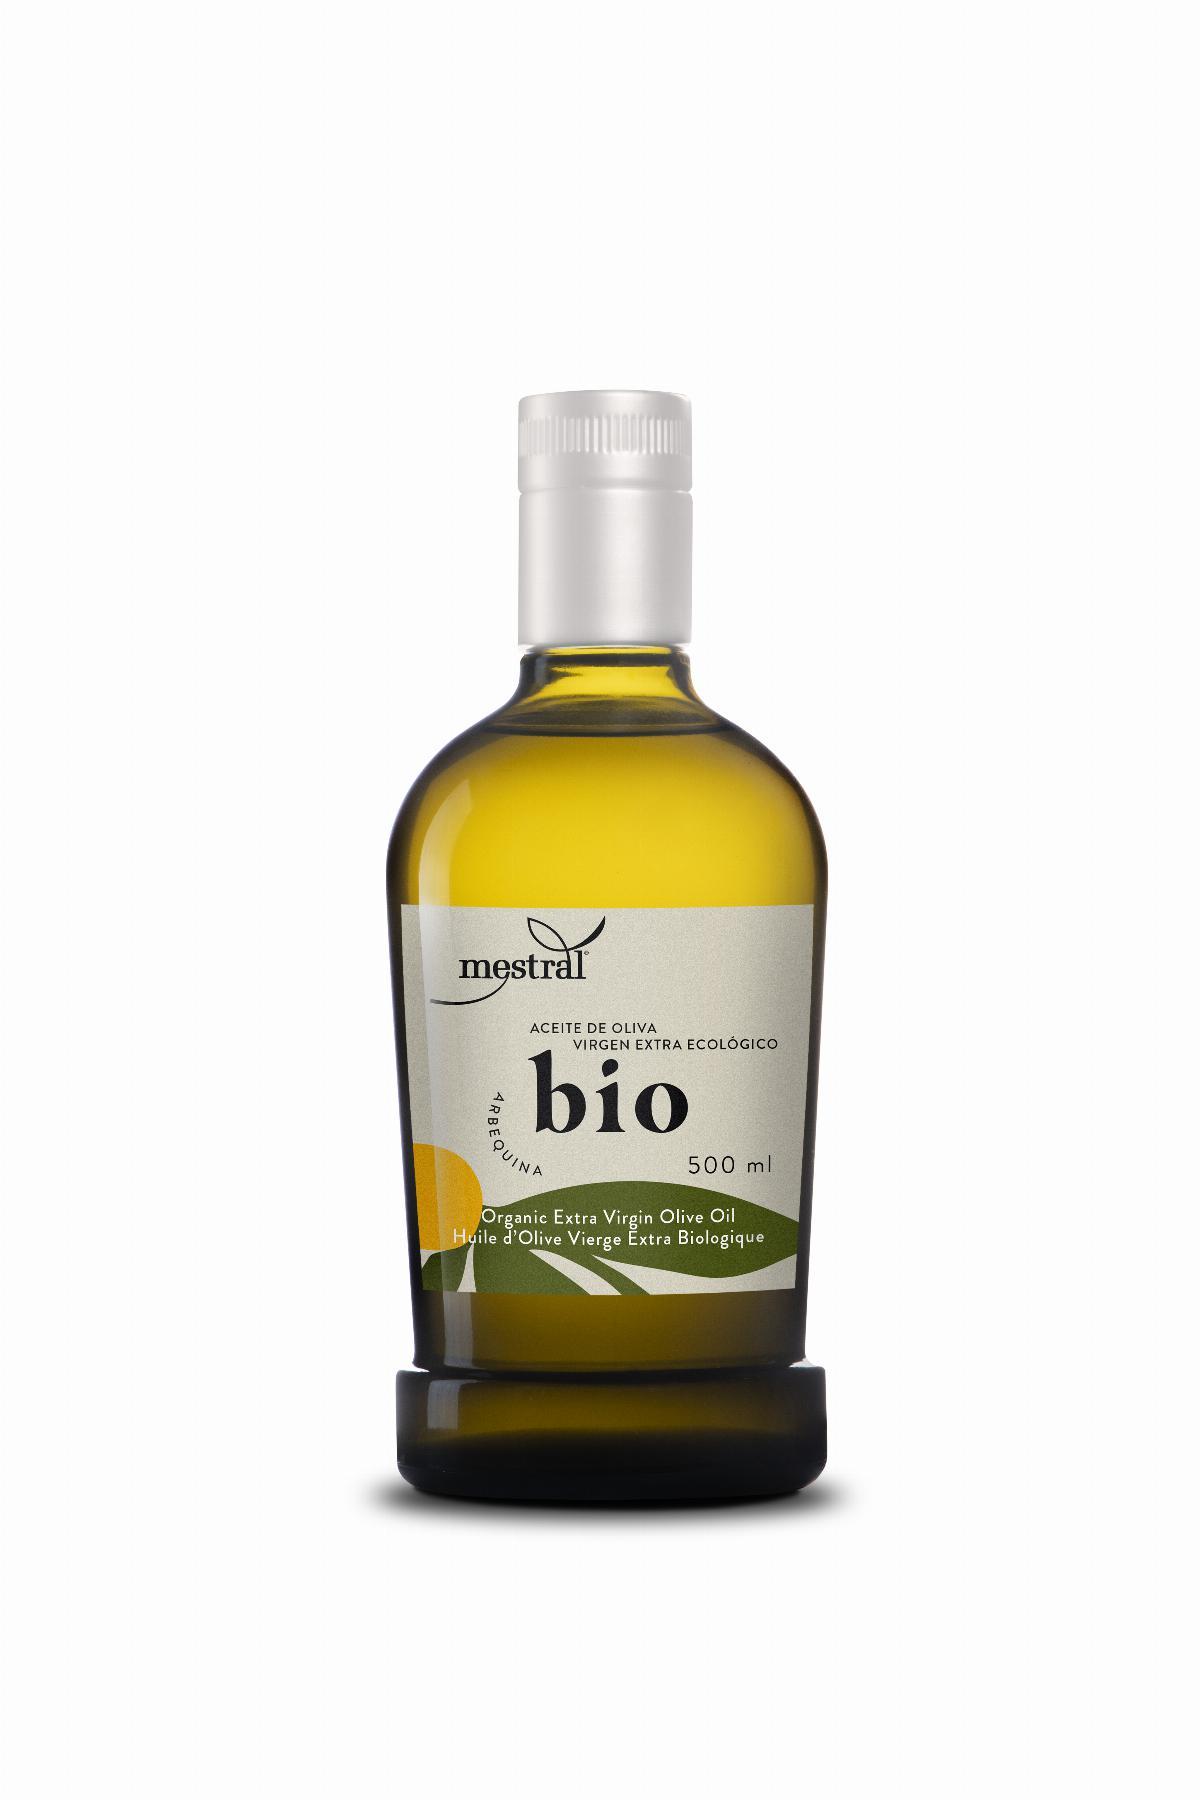 Huile d'Olive Vierge Extra Mestral BIO agric.Biologique Bout. 500mL 100% Arbequina